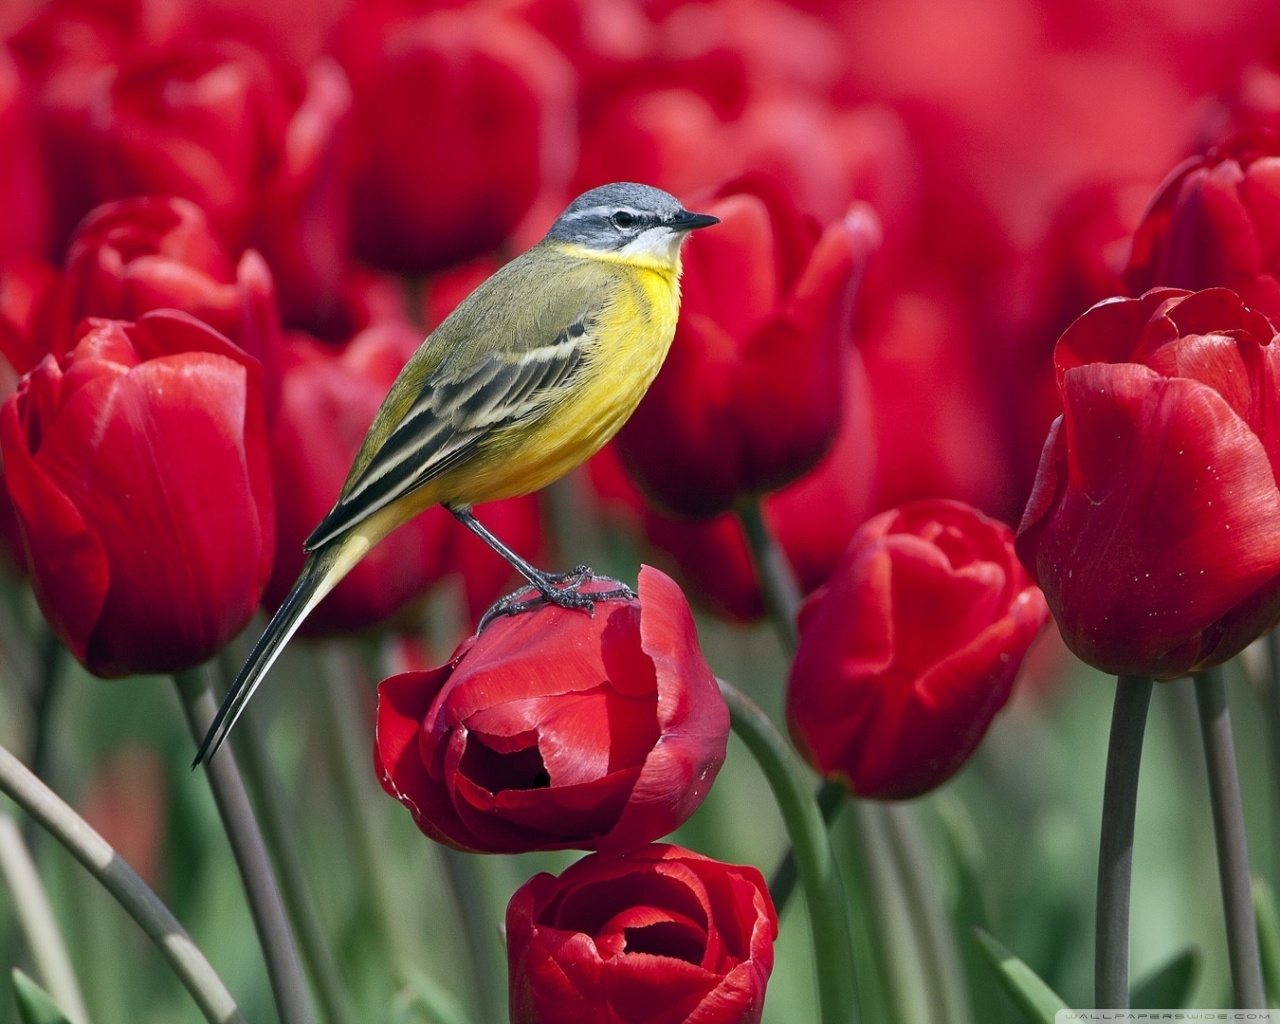 Bird and Red Tulips Ultra HD Desktop Background Wallpaper for 4K UHD TV ...